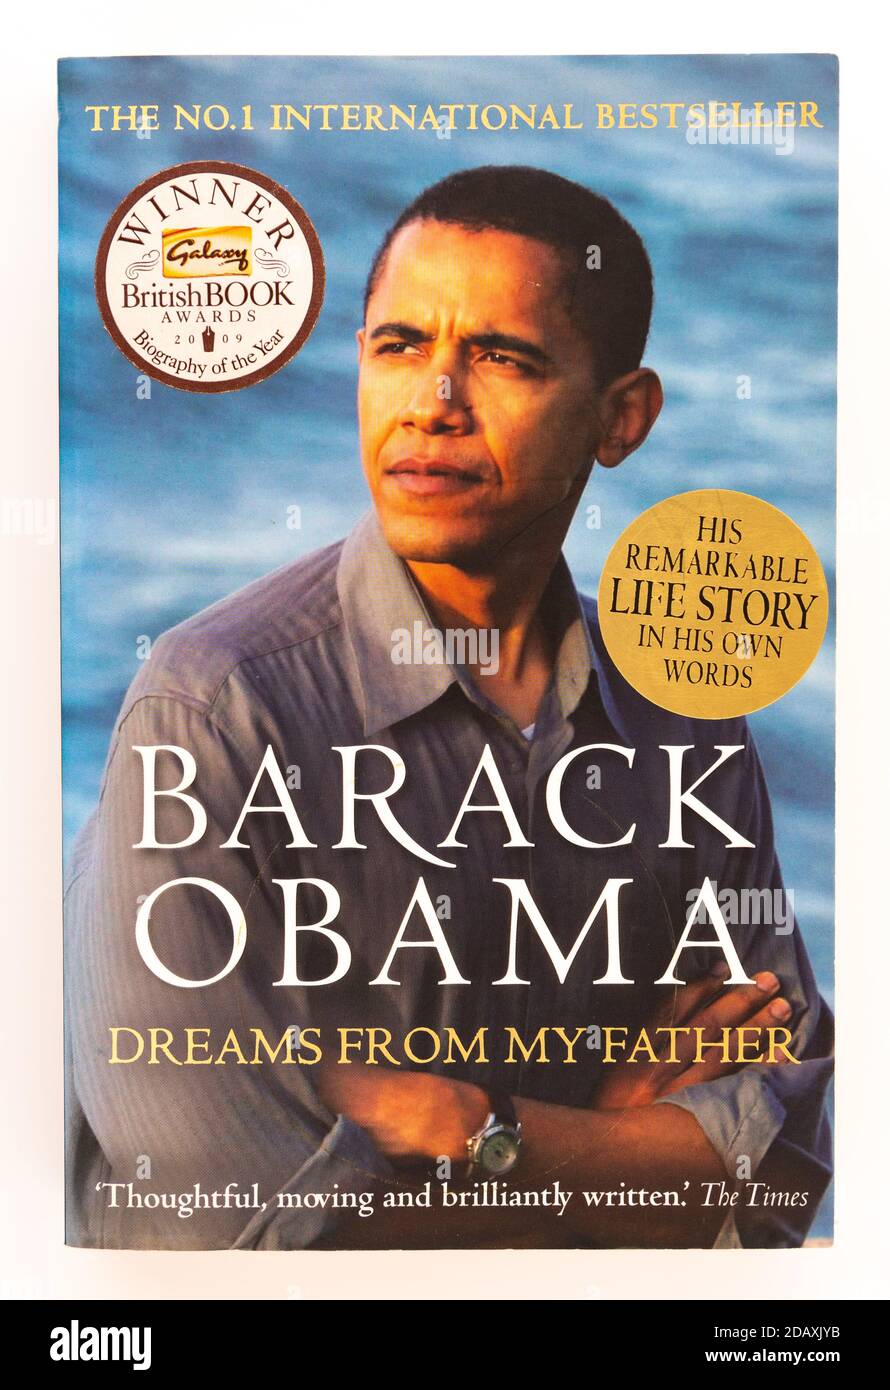 Barack Obama Dreams from my father book Stock Photo